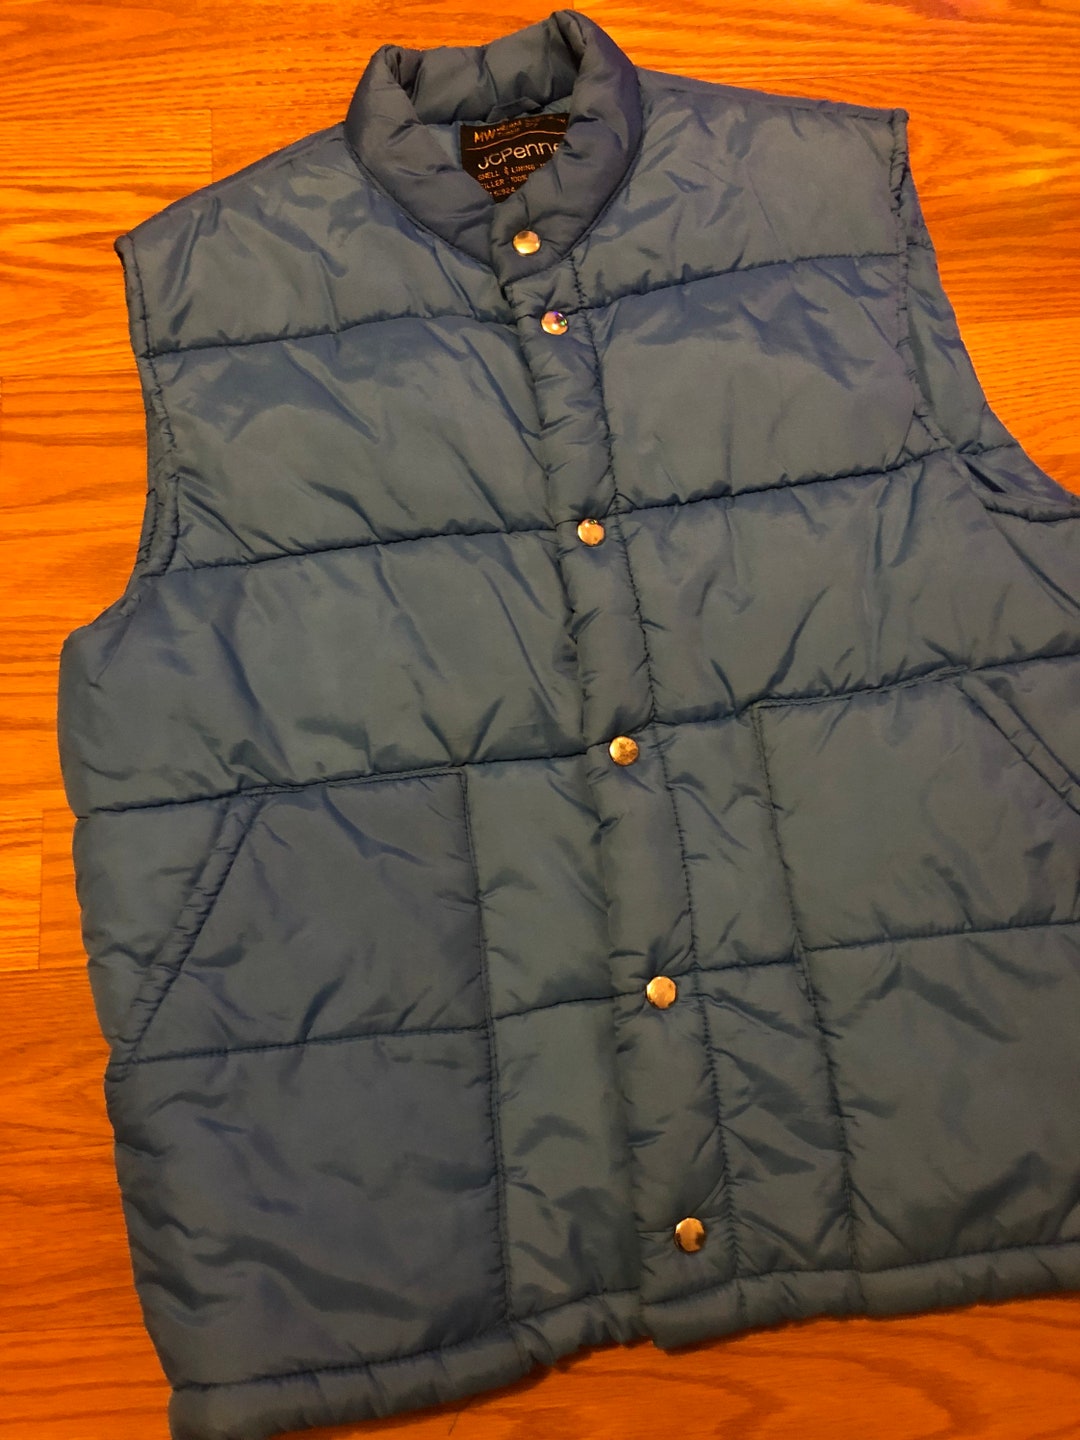 Vintage Jcpenney 1970's Puffer Vest 1970s Style - Etsy